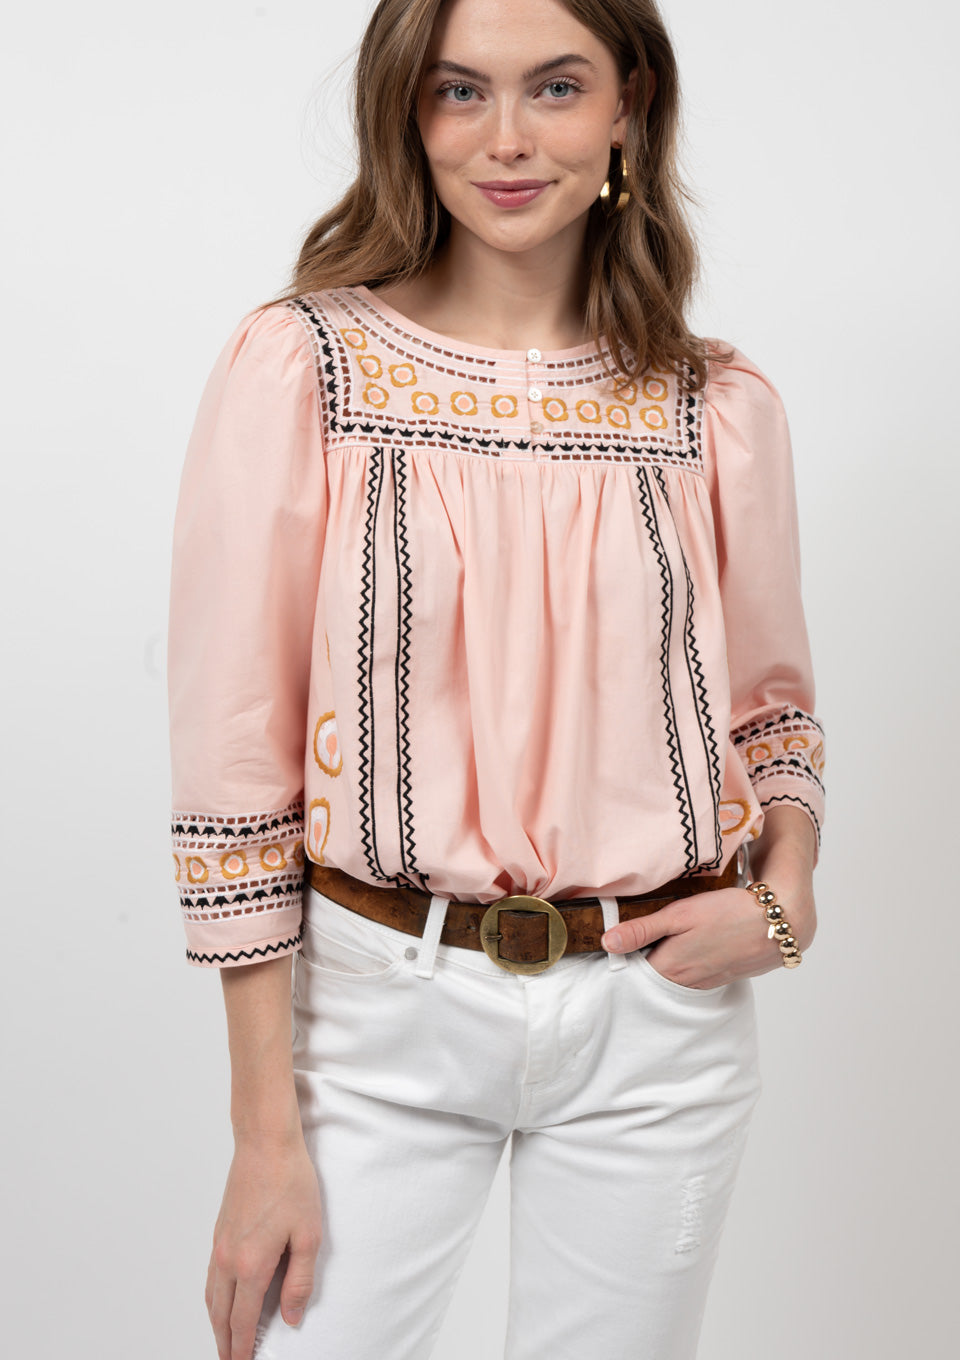 IVY JANE SMOCKED TOP W/ EMBROIDERY - BLUSH - 641405